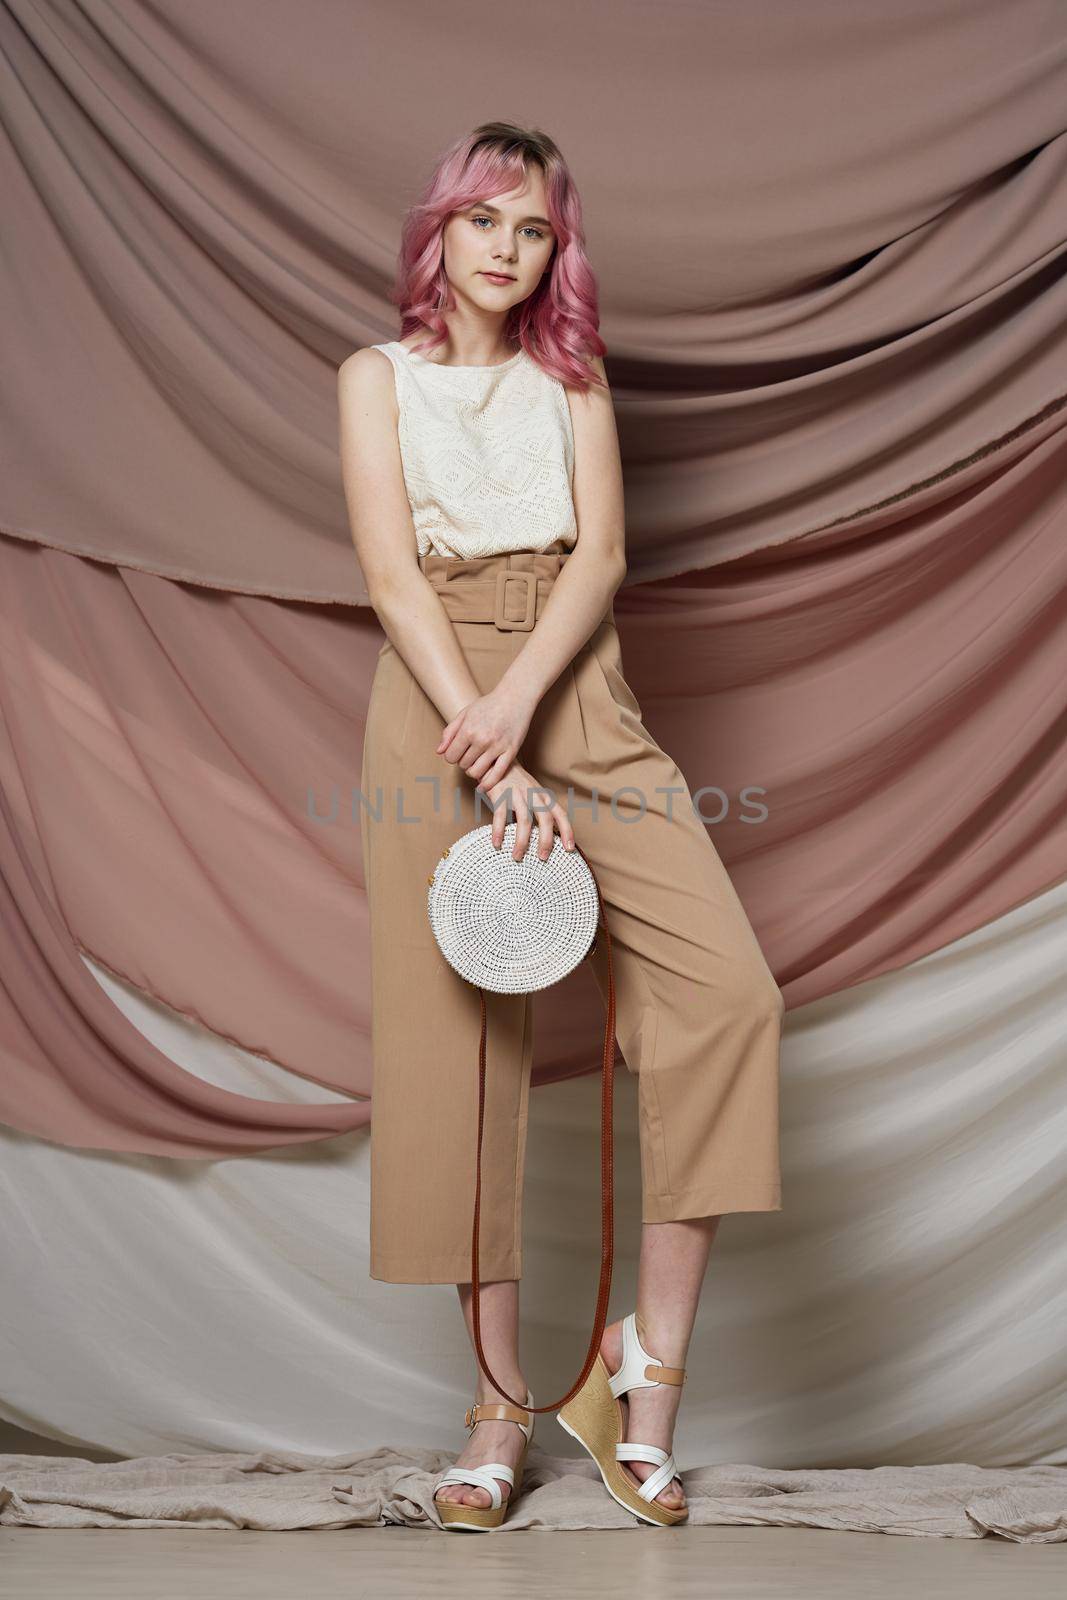 woman with pink hair pack with oranges posing fashion. High quality photo